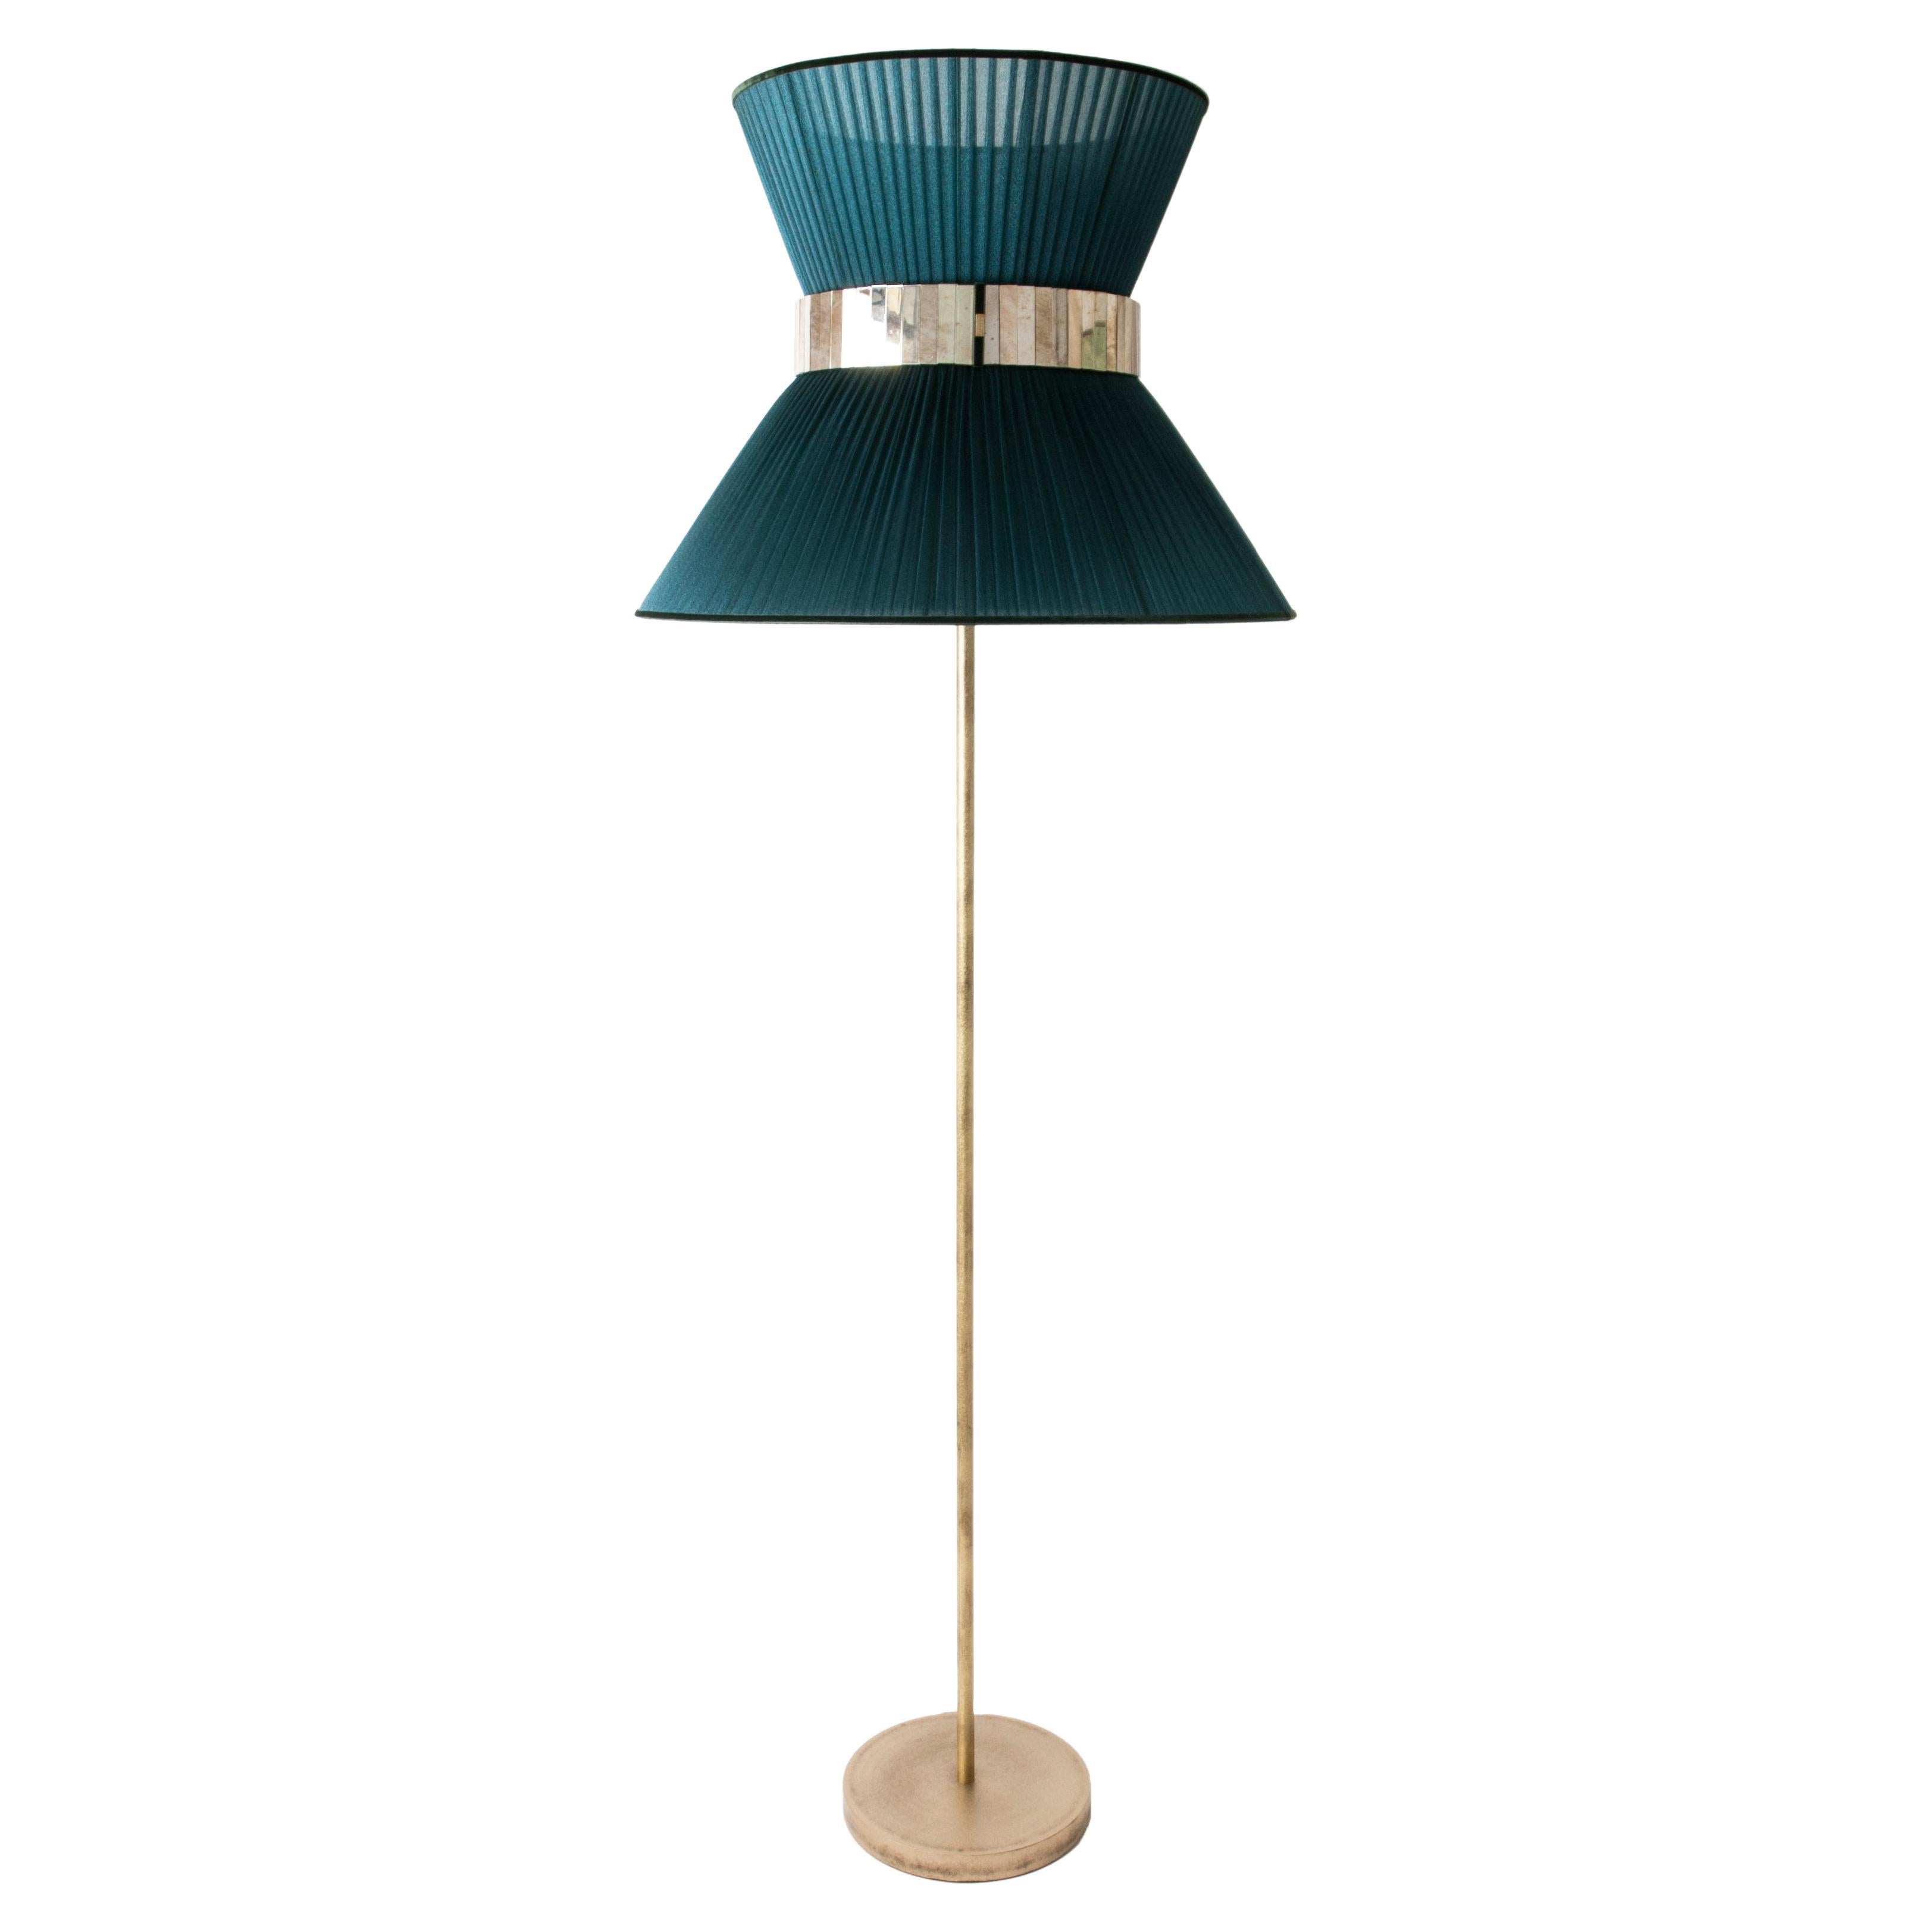 Tiffany contemporary Floor Lamp 60 Tree Silk, Antiqued Brass, Silvered Glass  